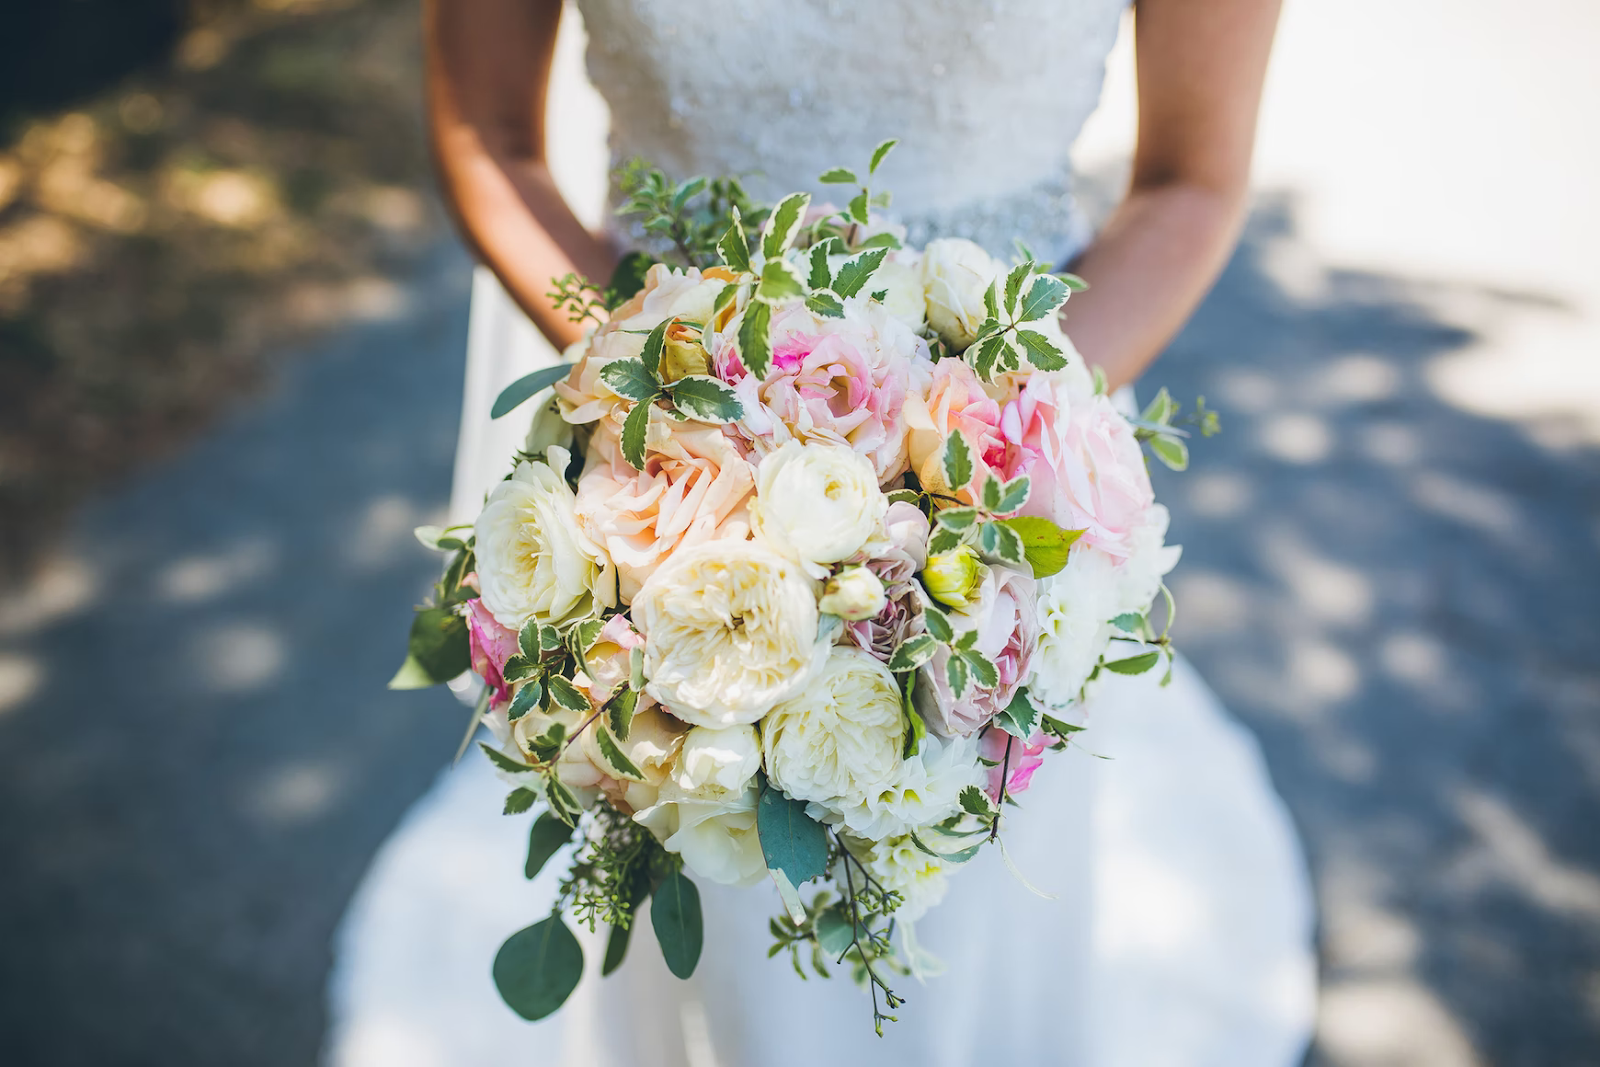 bride with white and pink wedding bouquet to do week before wedding